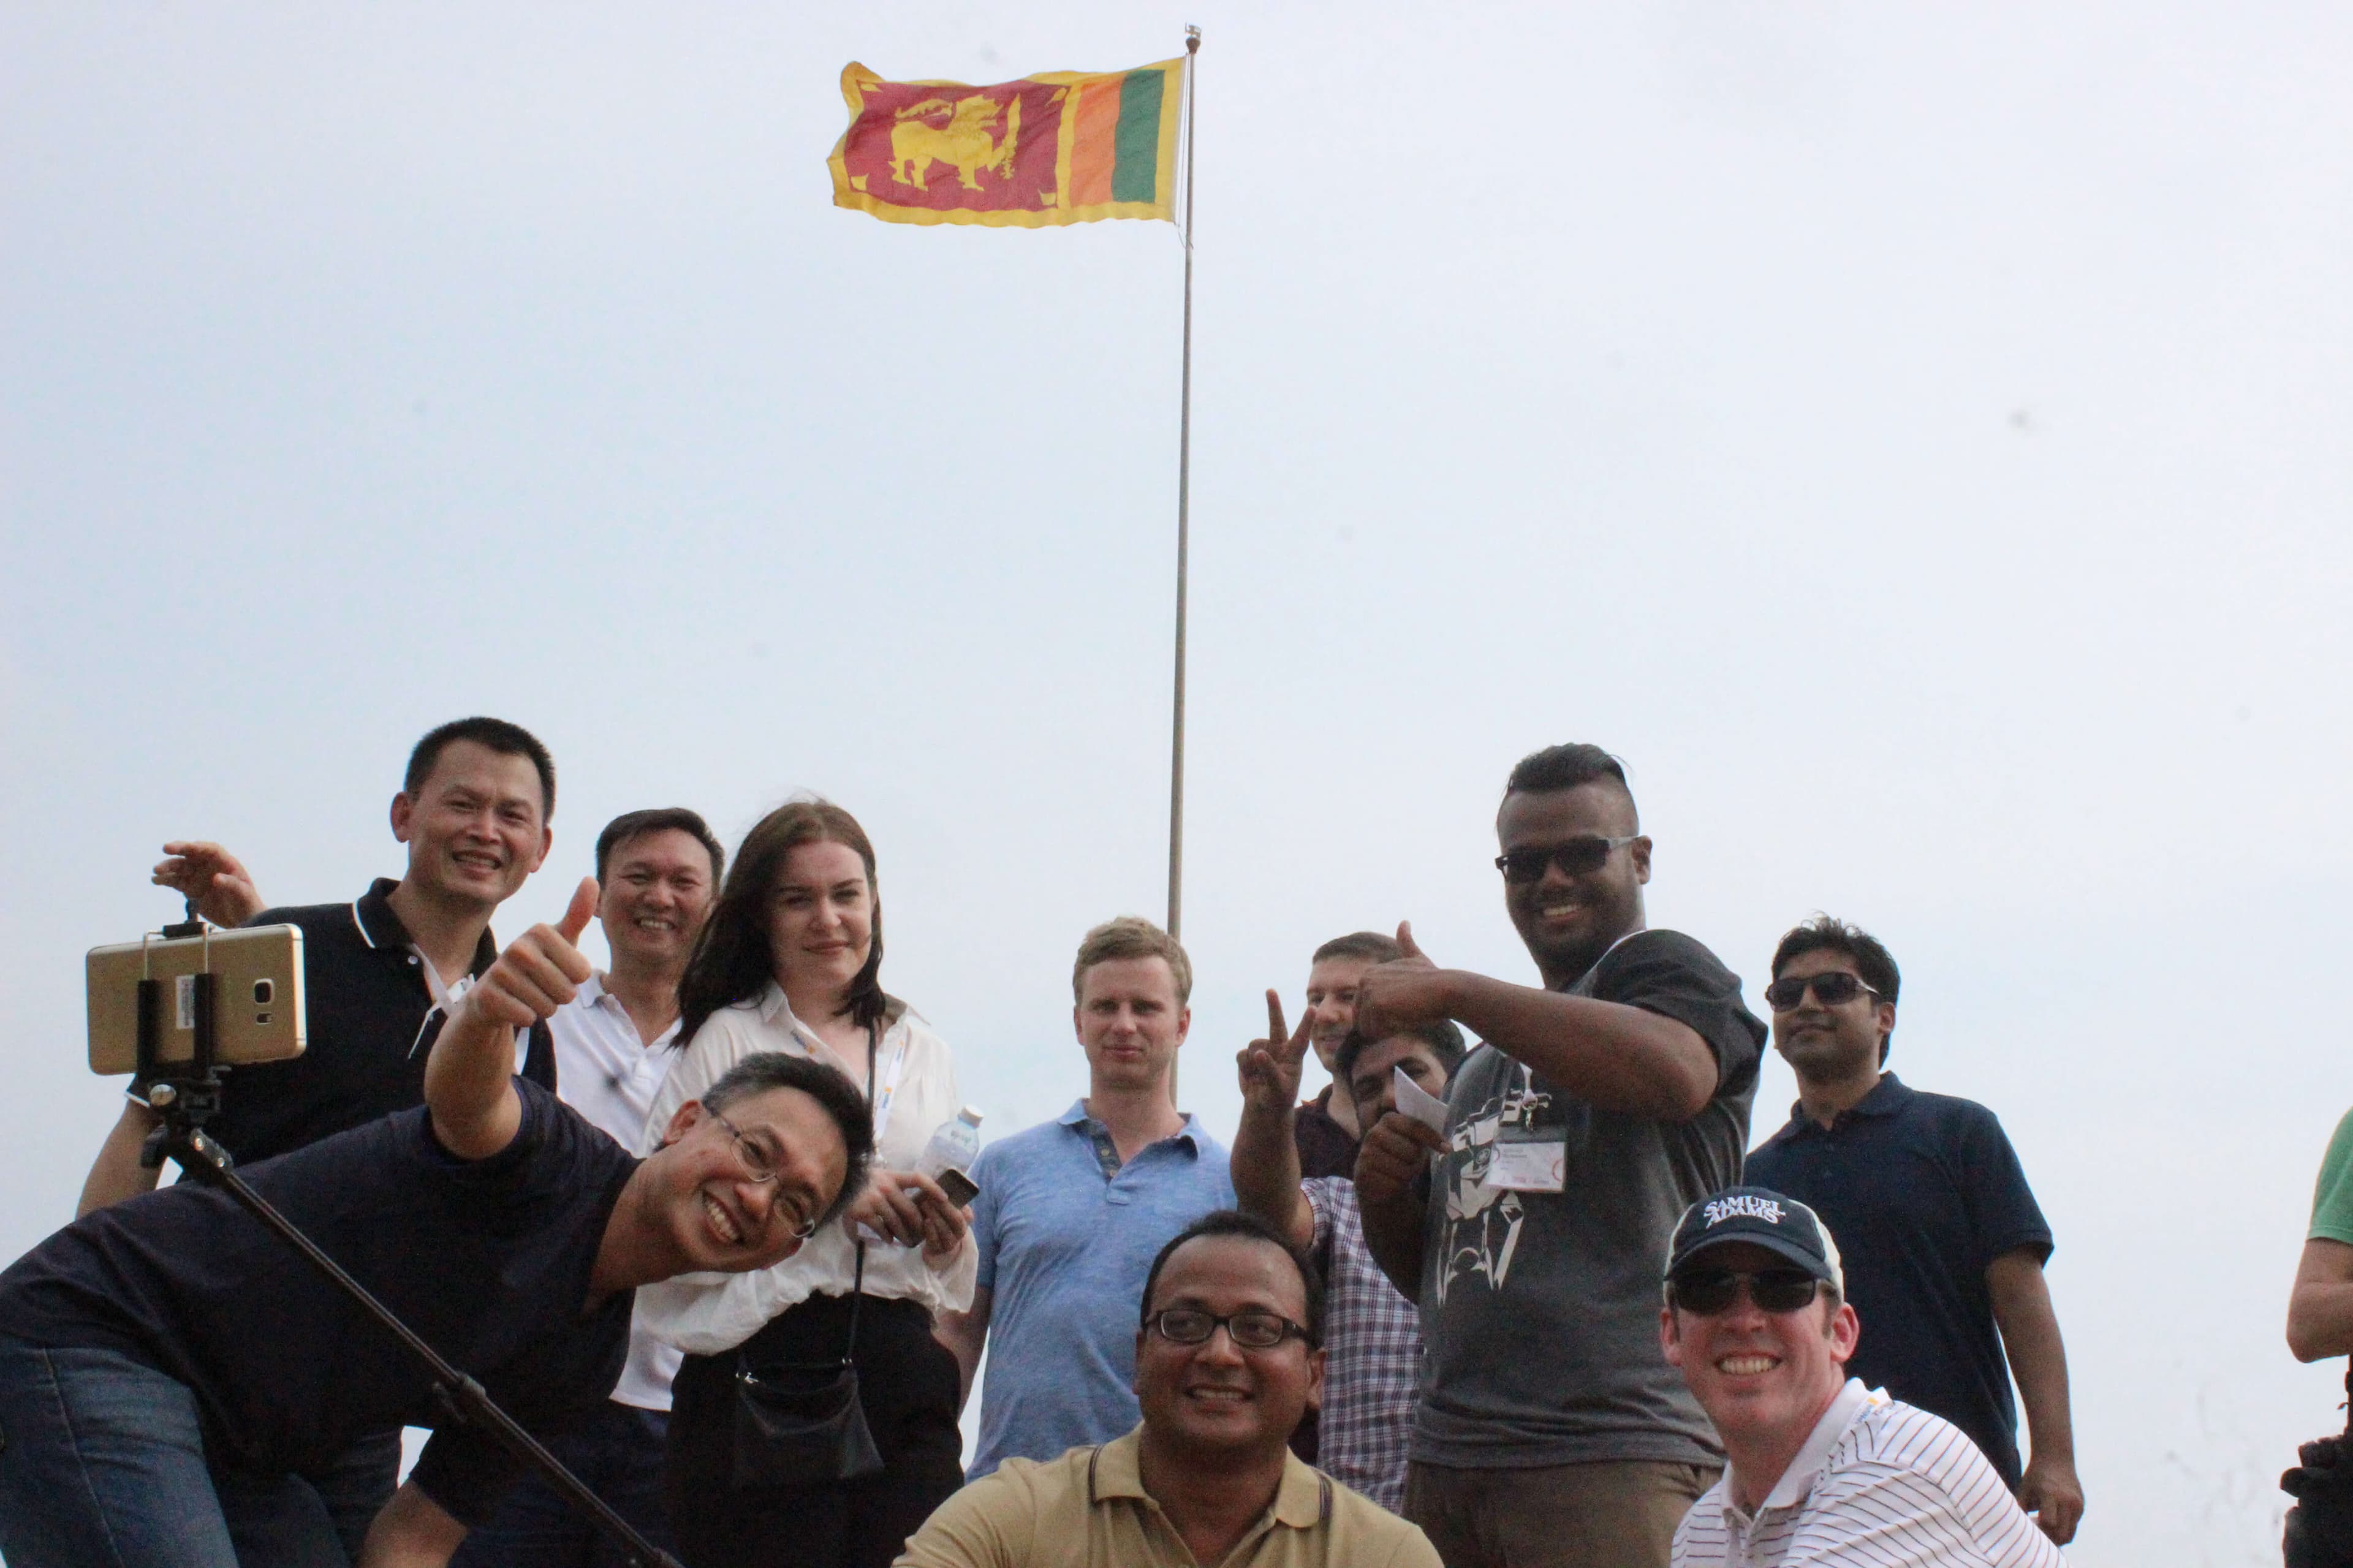 A group photo of the team with the Sri Lankan flag in the background.